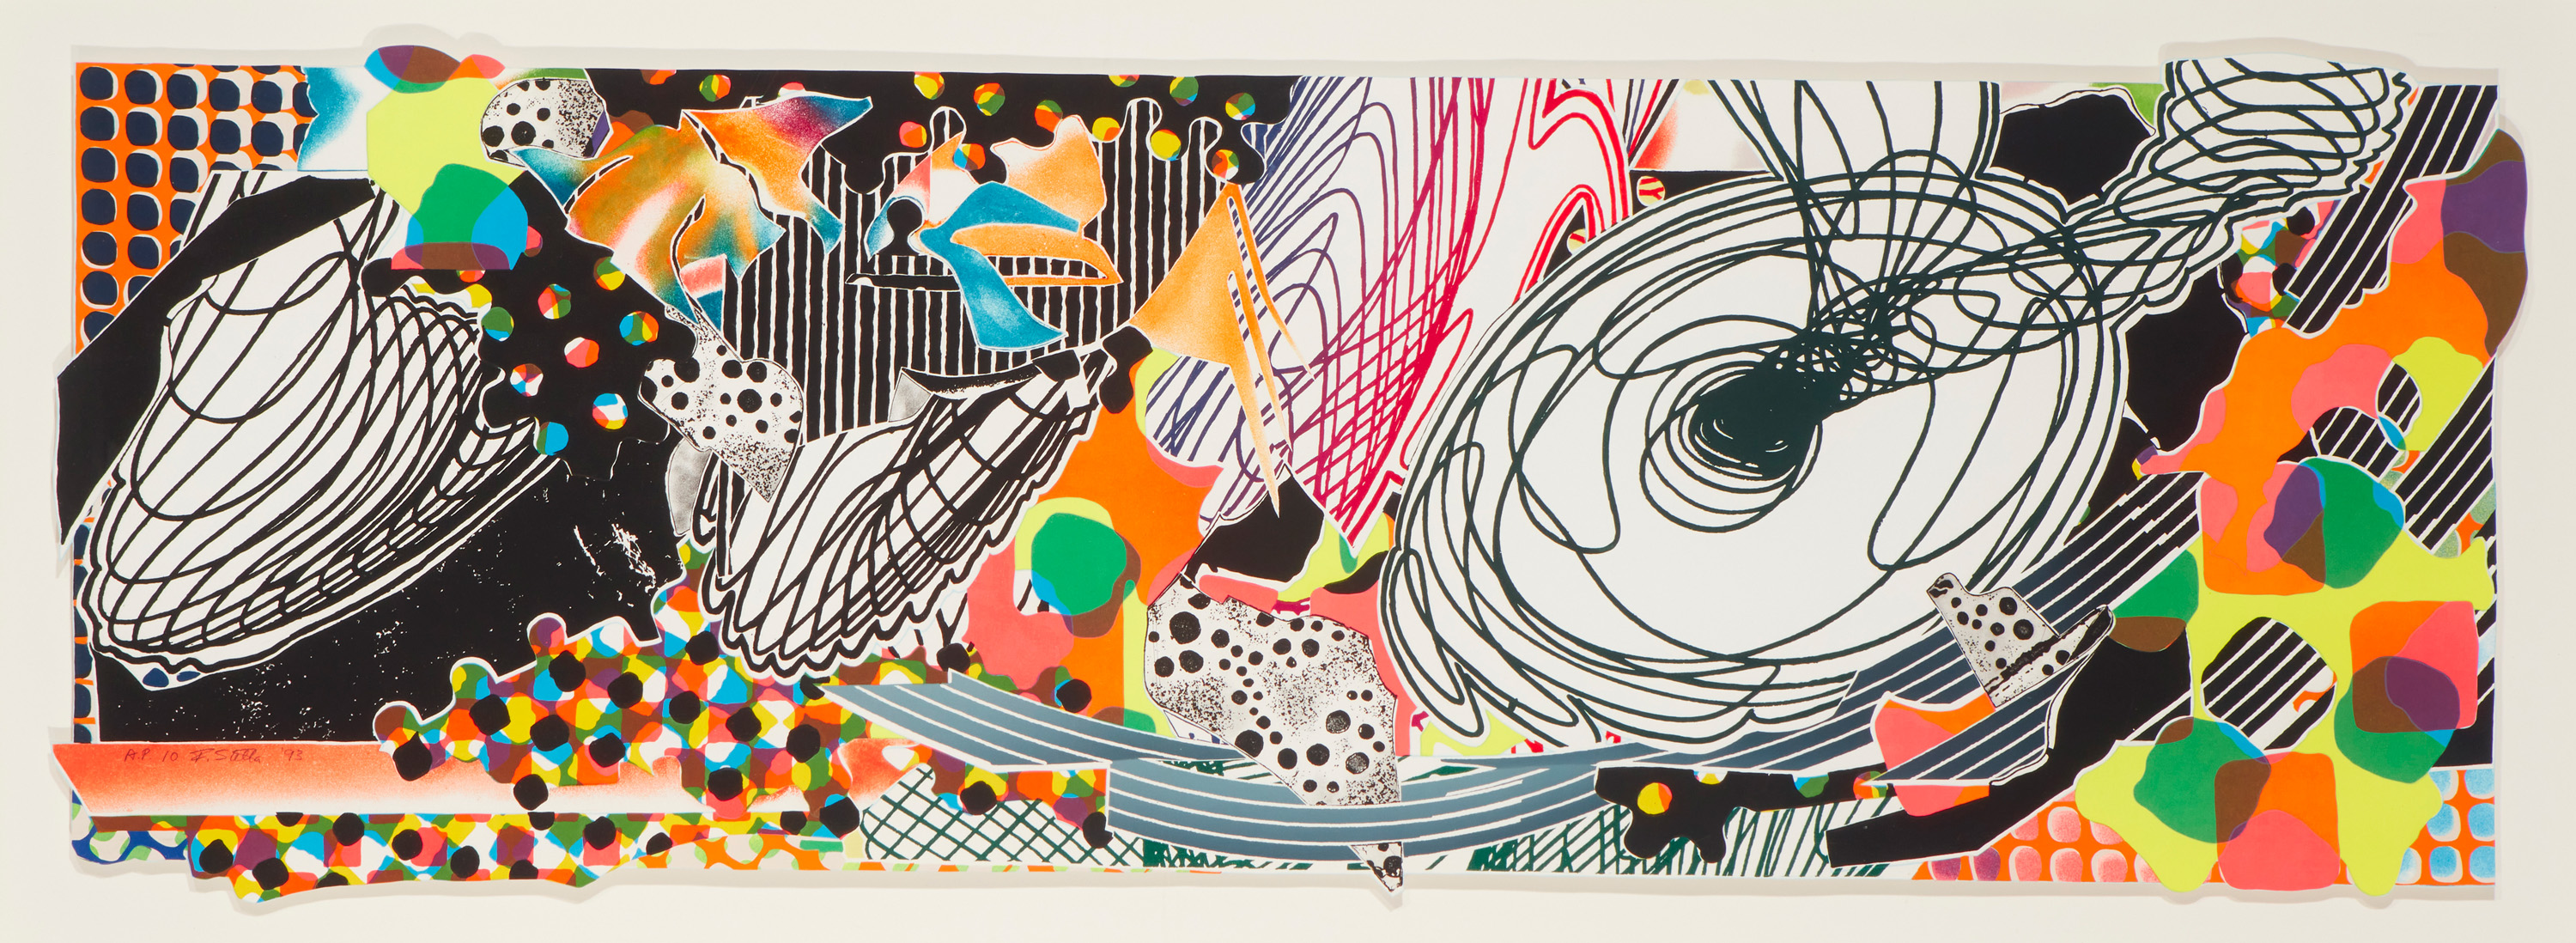 Frank Stella, ‘The Monkey Rope,’ lithograph from ‘Moby Dick Deckle Edges,’ $23,750